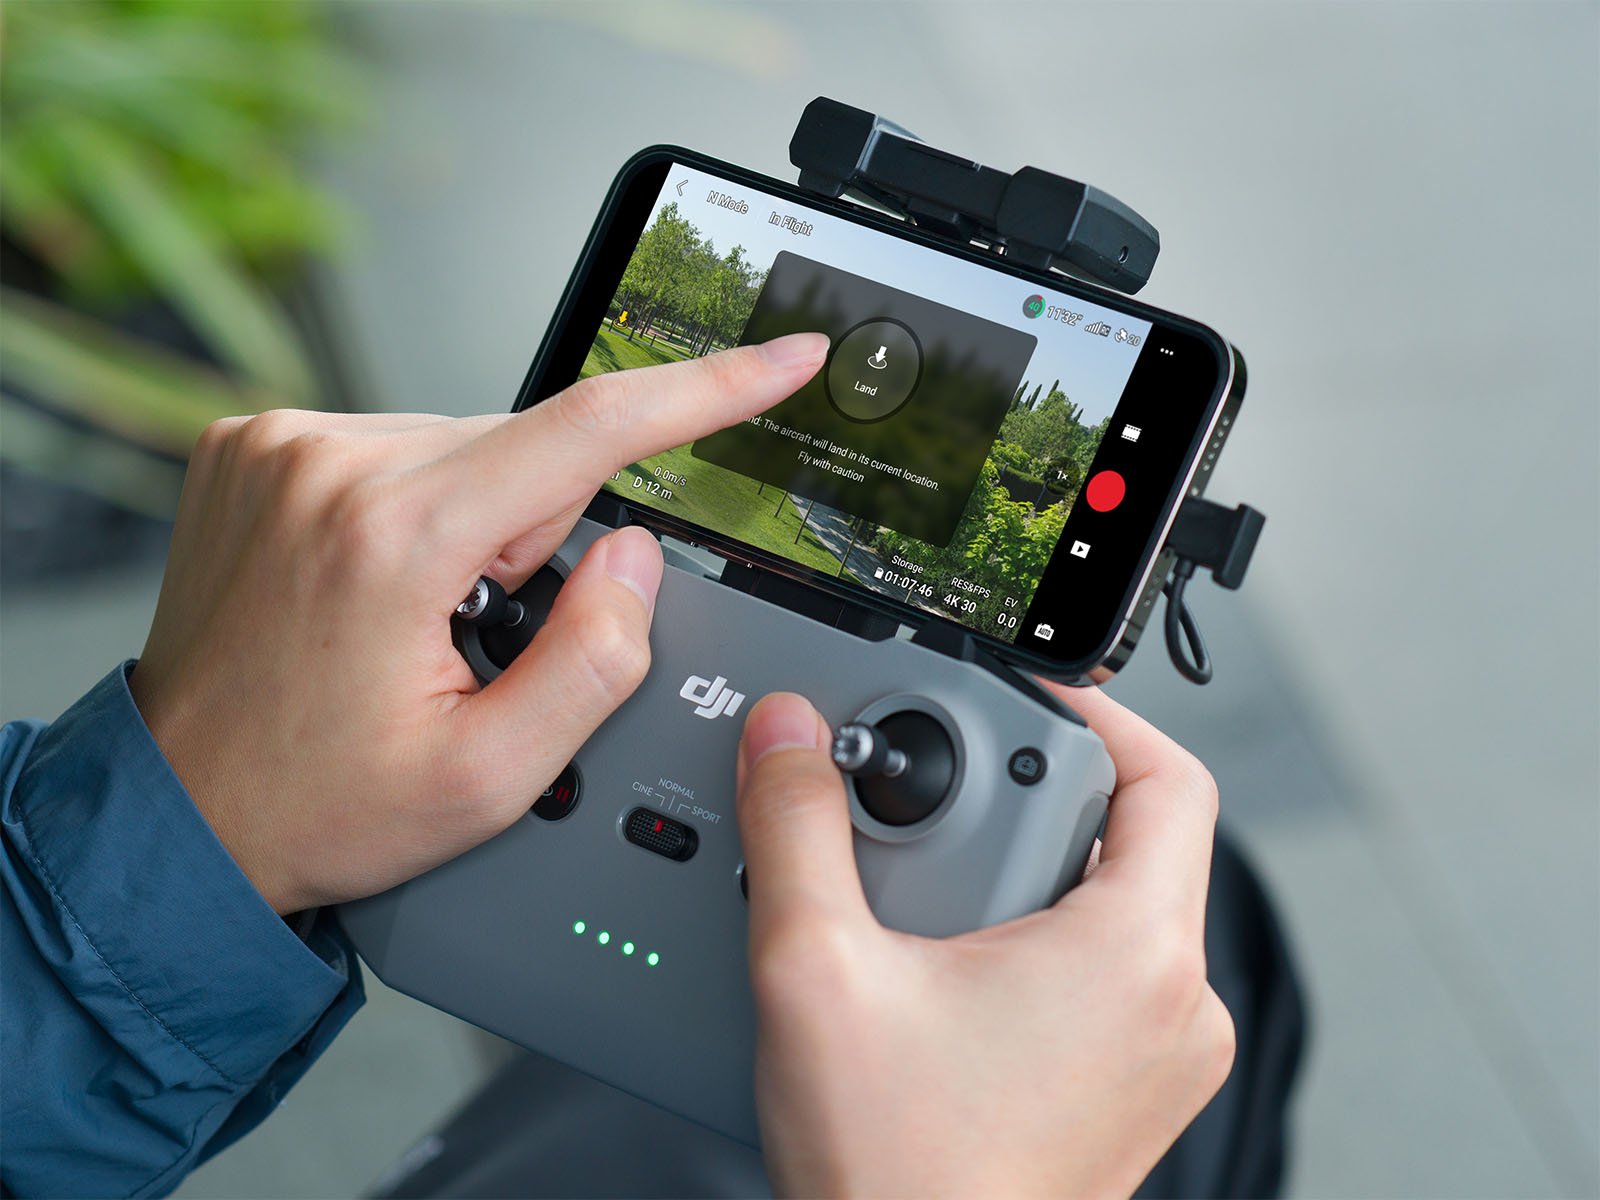 Hands of a person using a drone controller with a mobile phone connected, showing the camera view of the green screen.